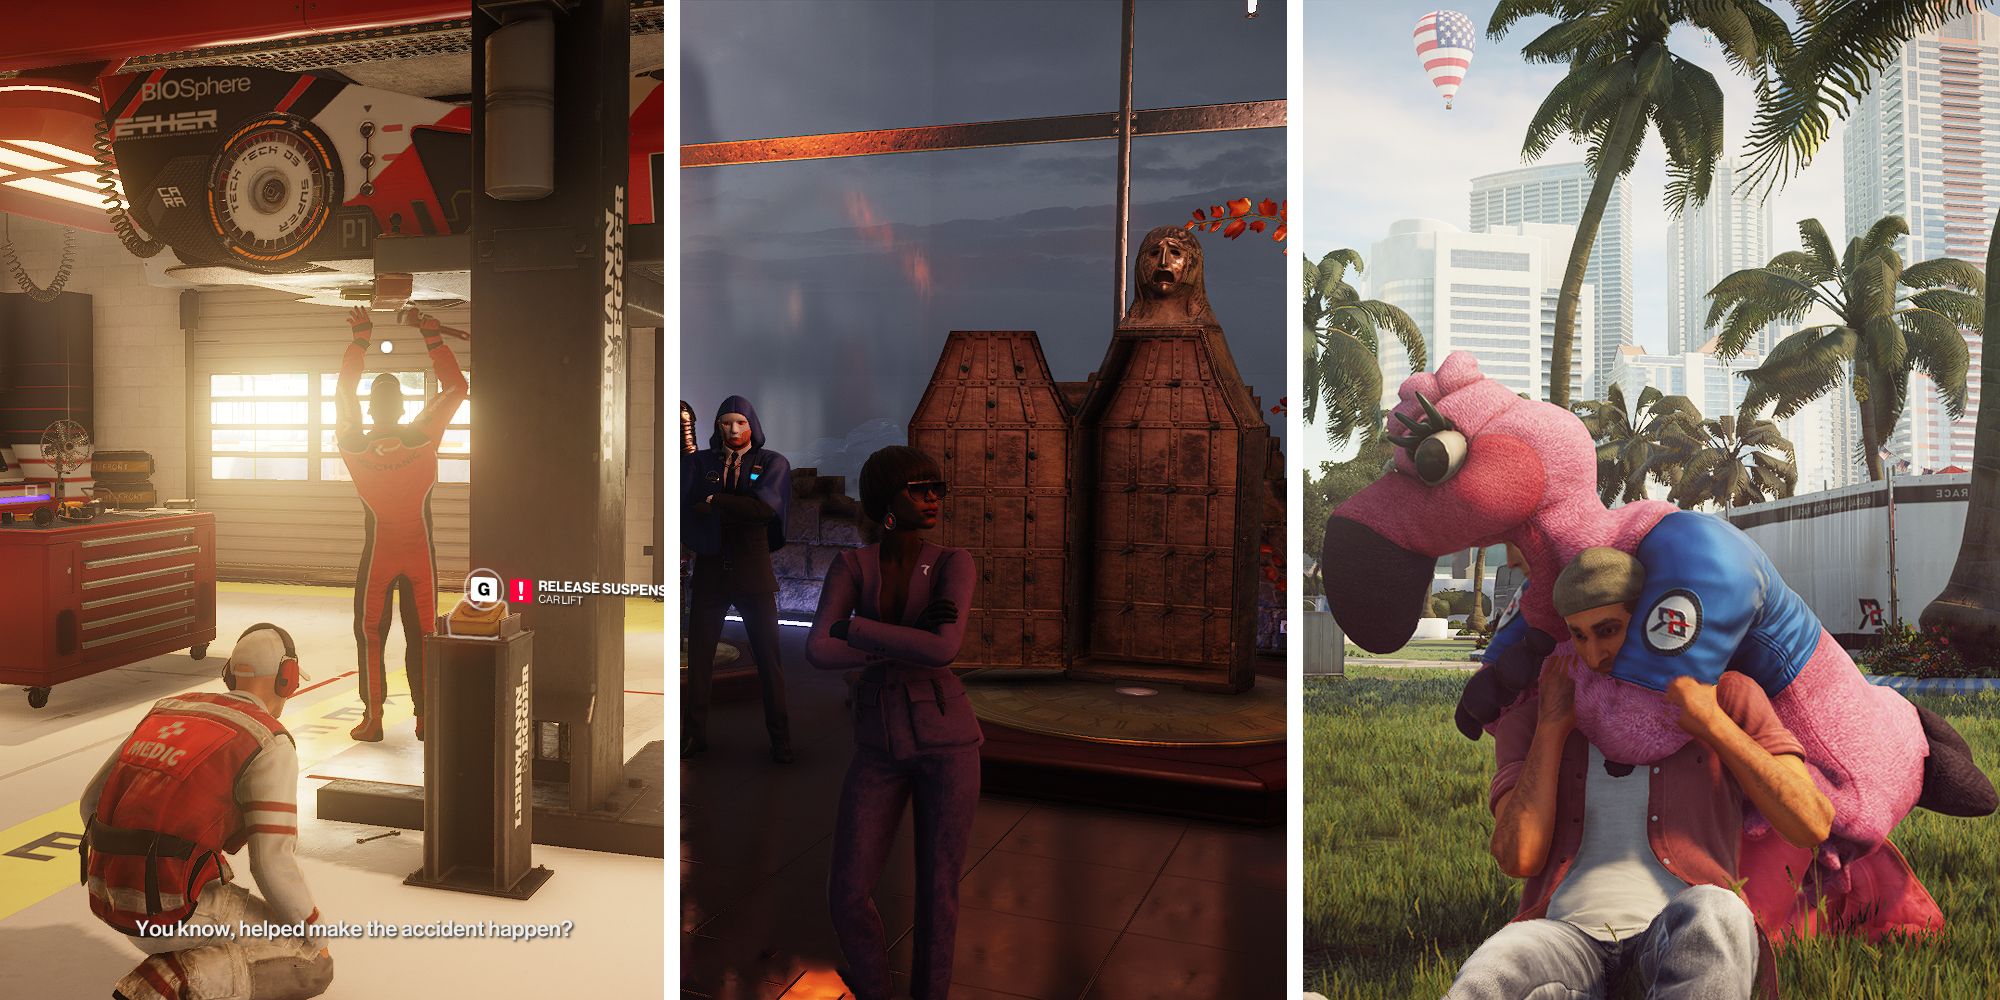 Agent 47 dropping a car on a mechanic and strangling a man while dressed as a flamingo. Sophia Washington stands in front of an iron maiden